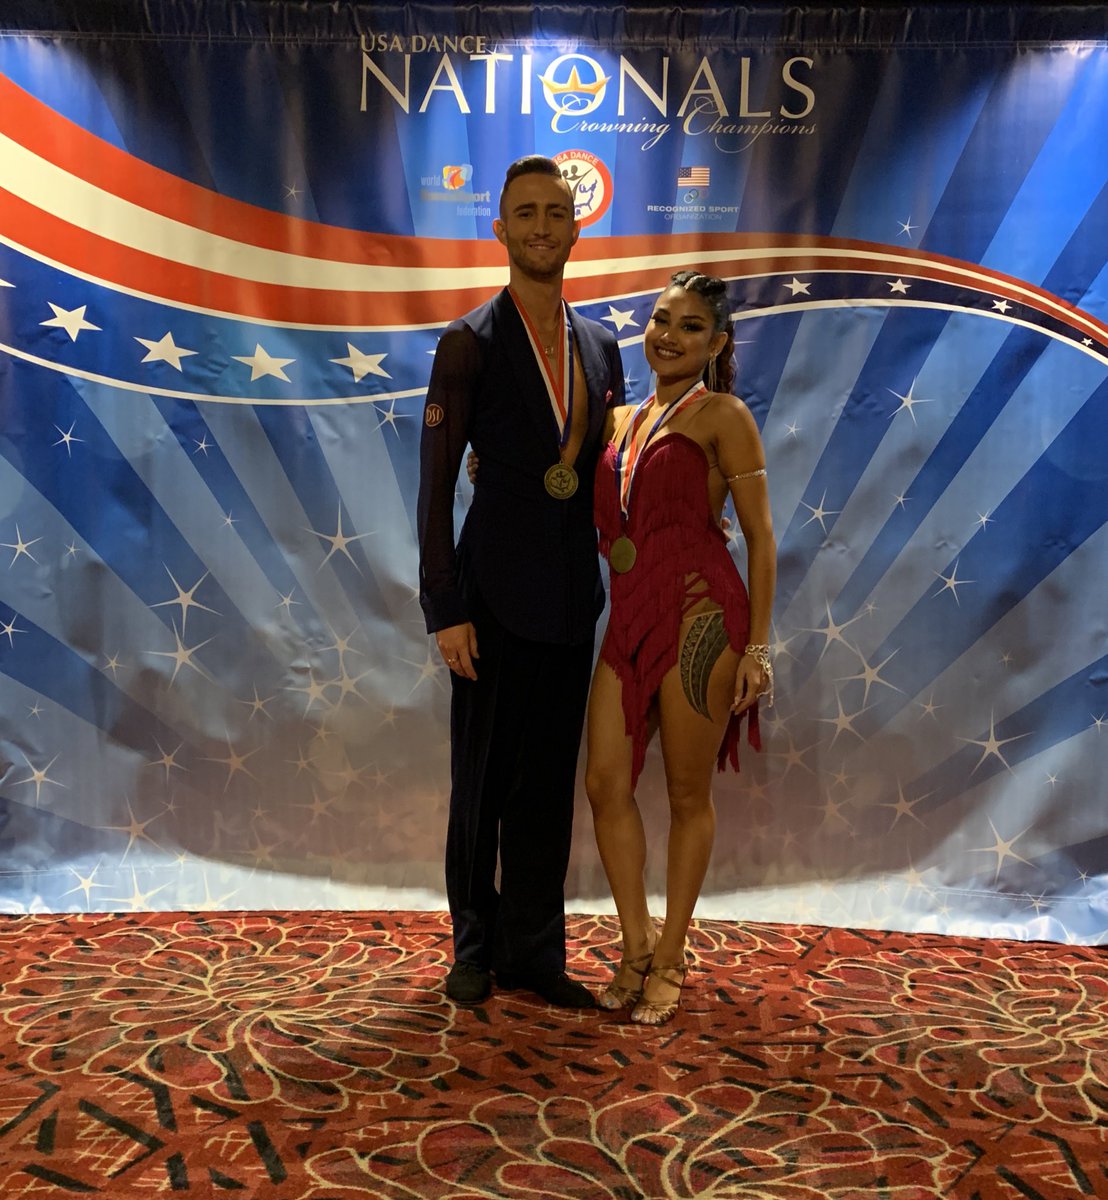 Even in residency, managed to secure 1st place this past weekend, becoming 5x US National Latin Dance Champions. Now back to foley and hematuria consults. #UroSoMe #dancingdoc